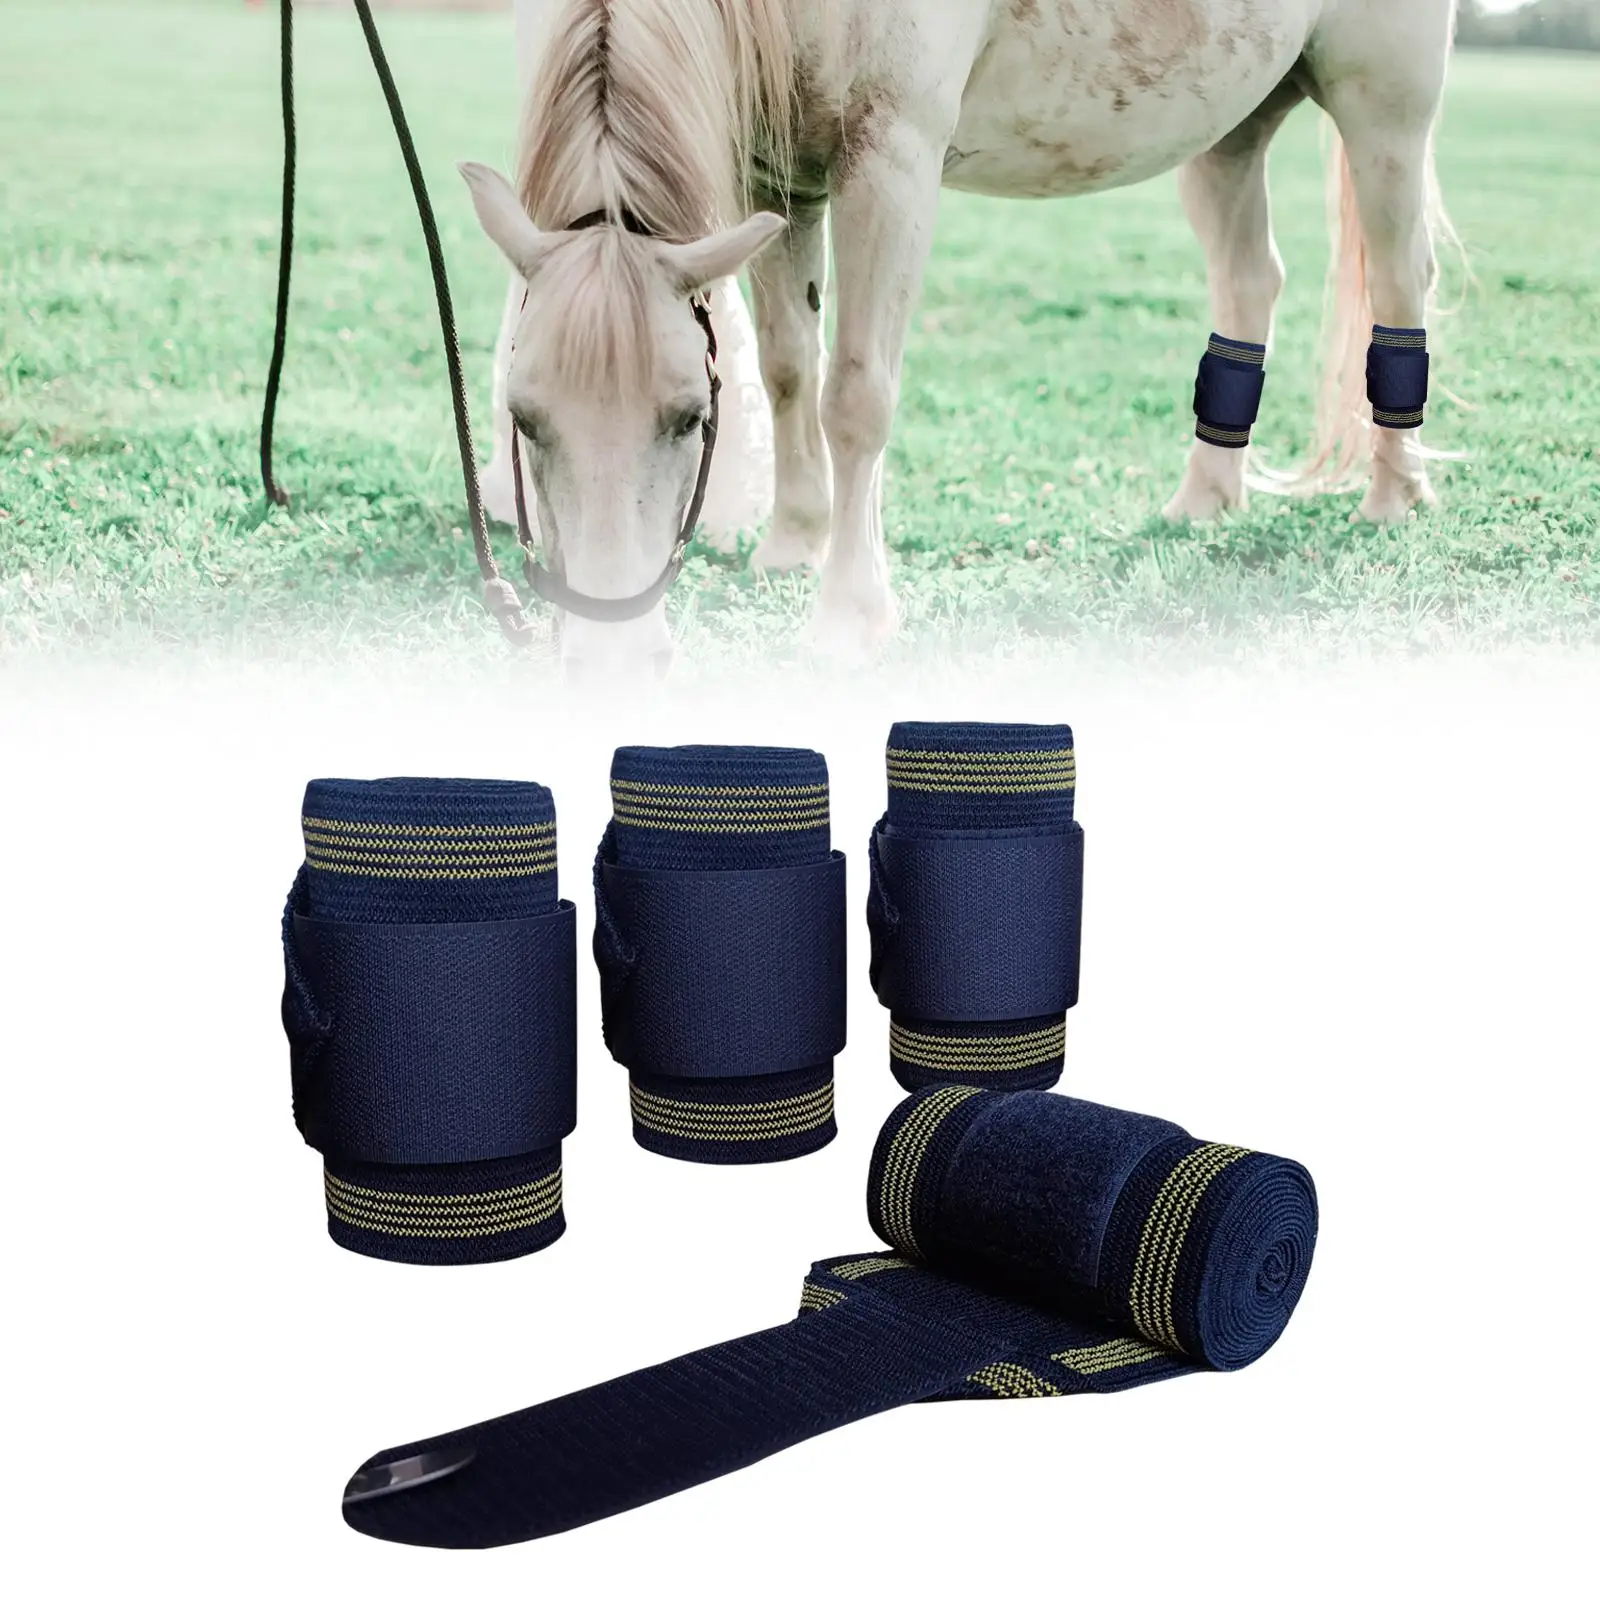 4x Horse Leg Wraps Elastic Thick Equestrian Equipment Riding Race Leg Horse Support Leg Protection Wrap for Outdoors Riding Race